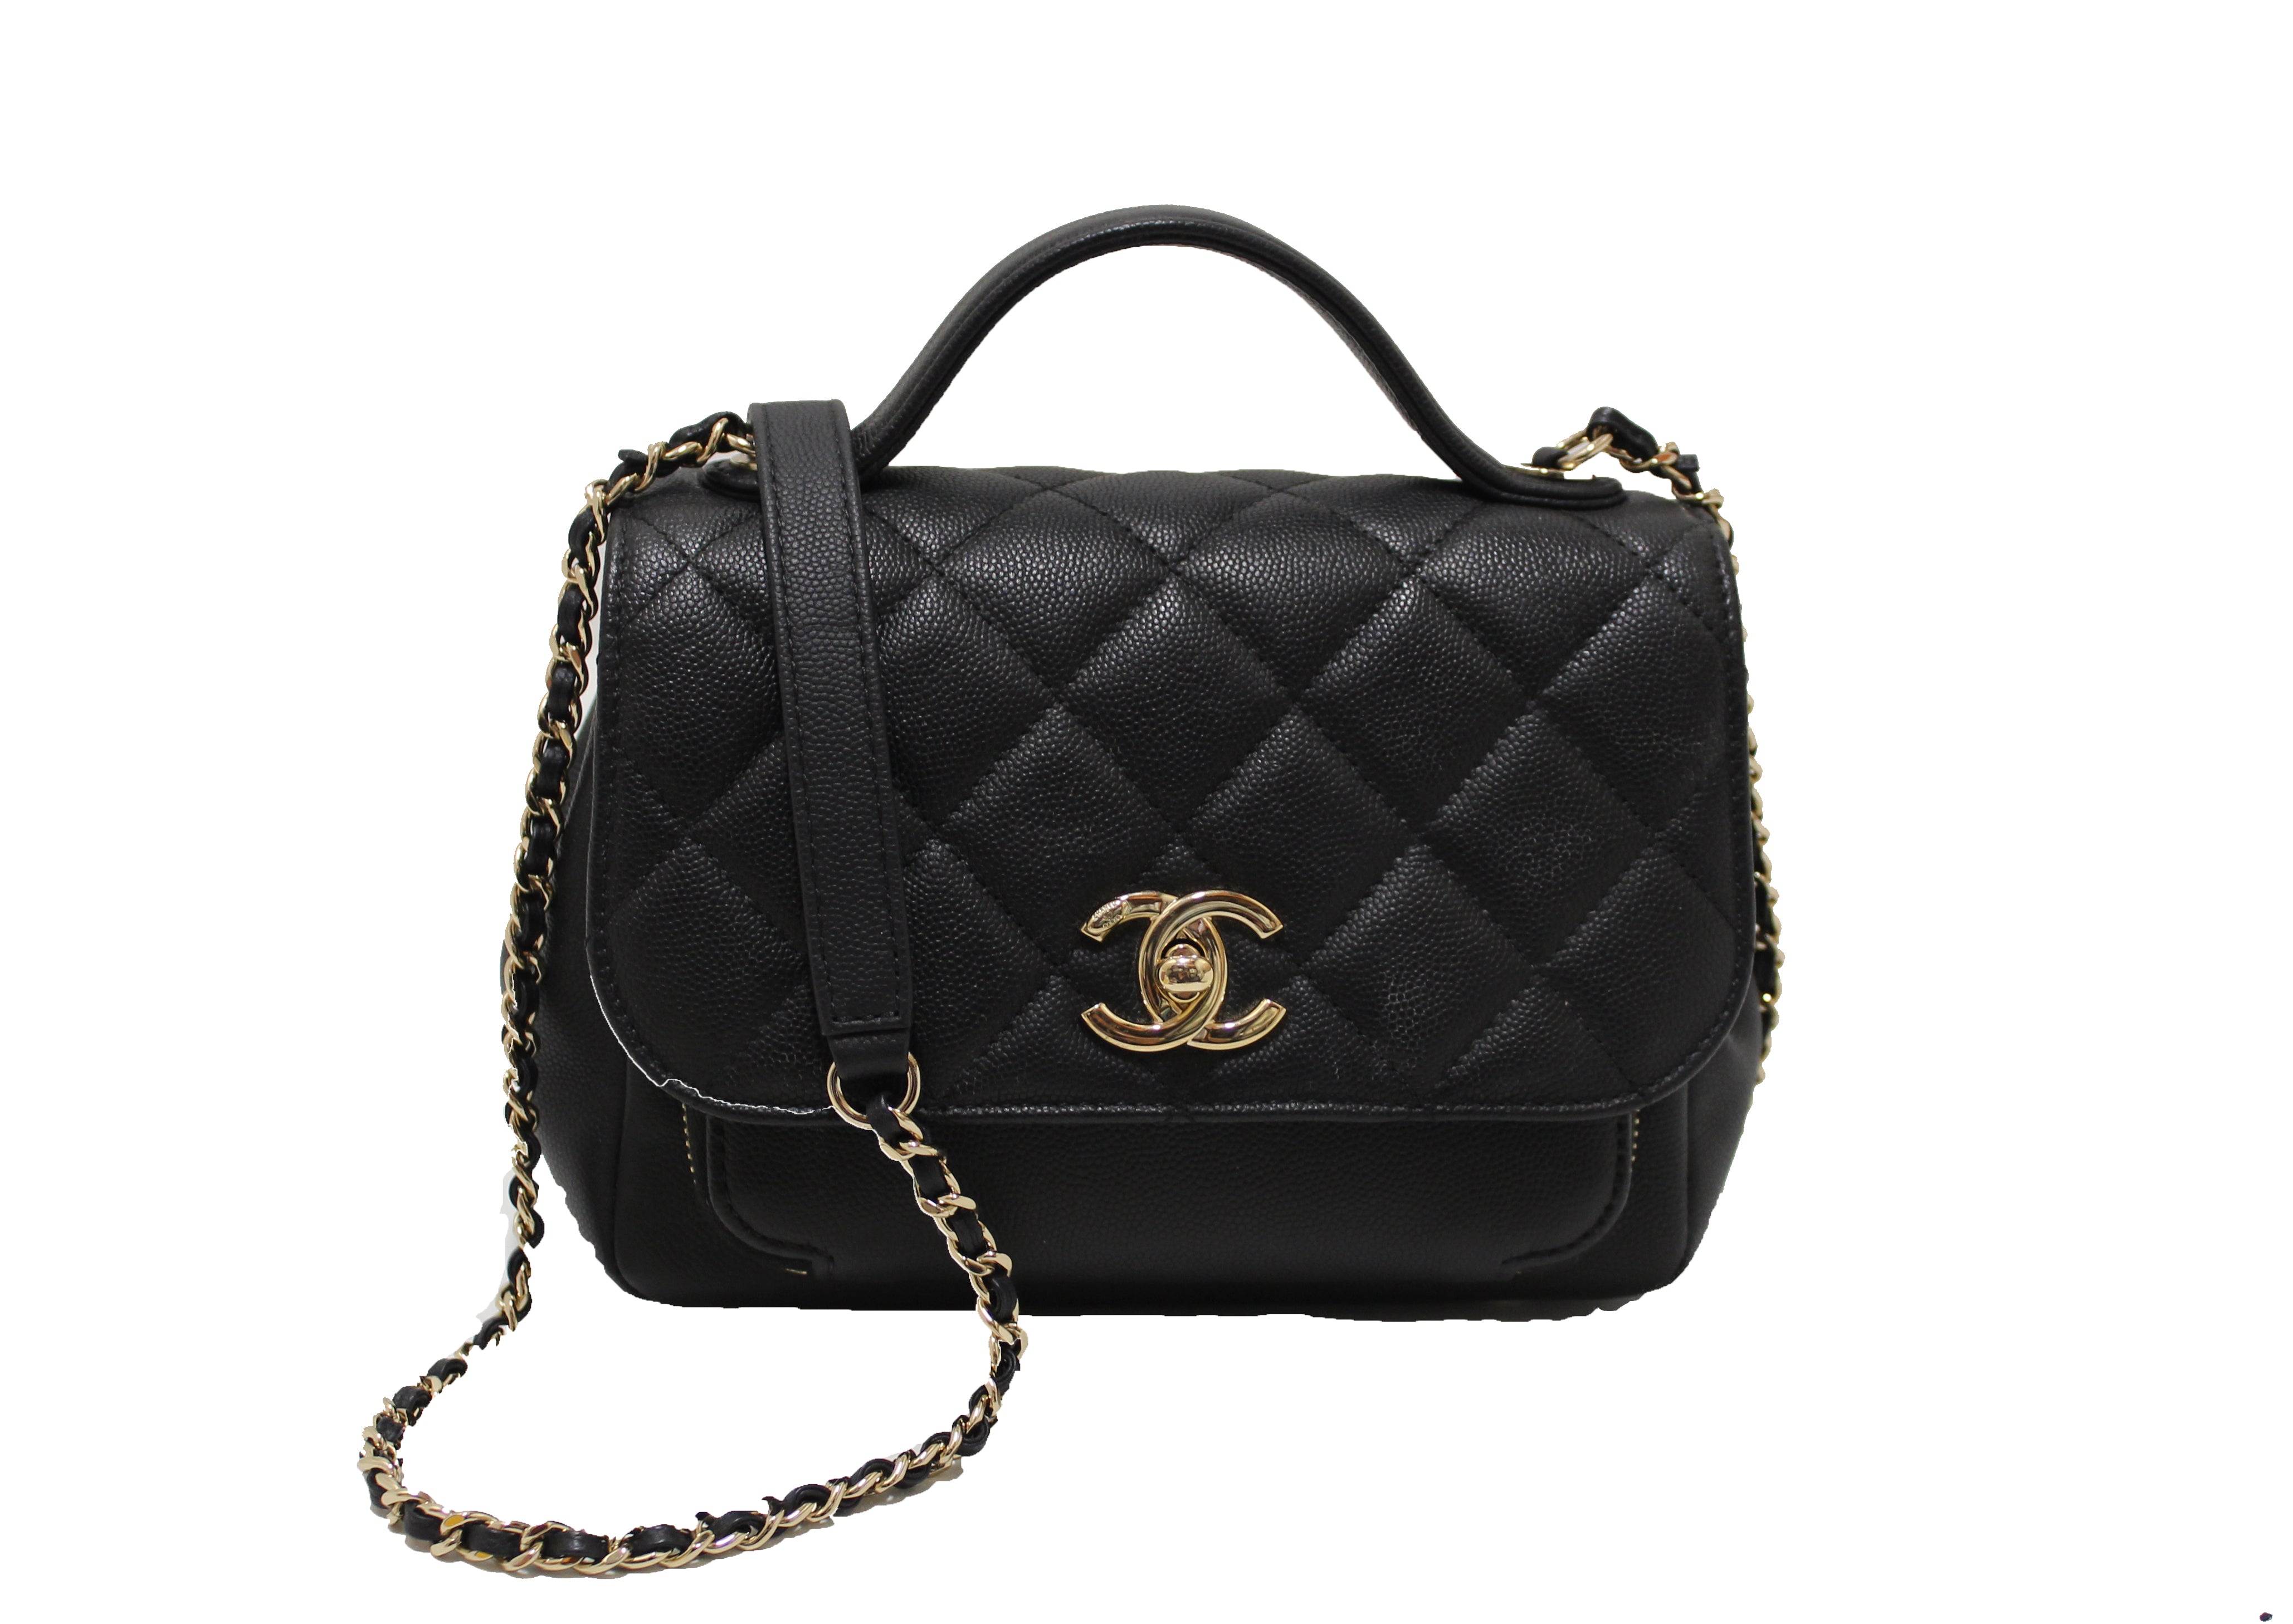 Chanel Black Caviar Leather Small Business Affinity Flap Shoulder